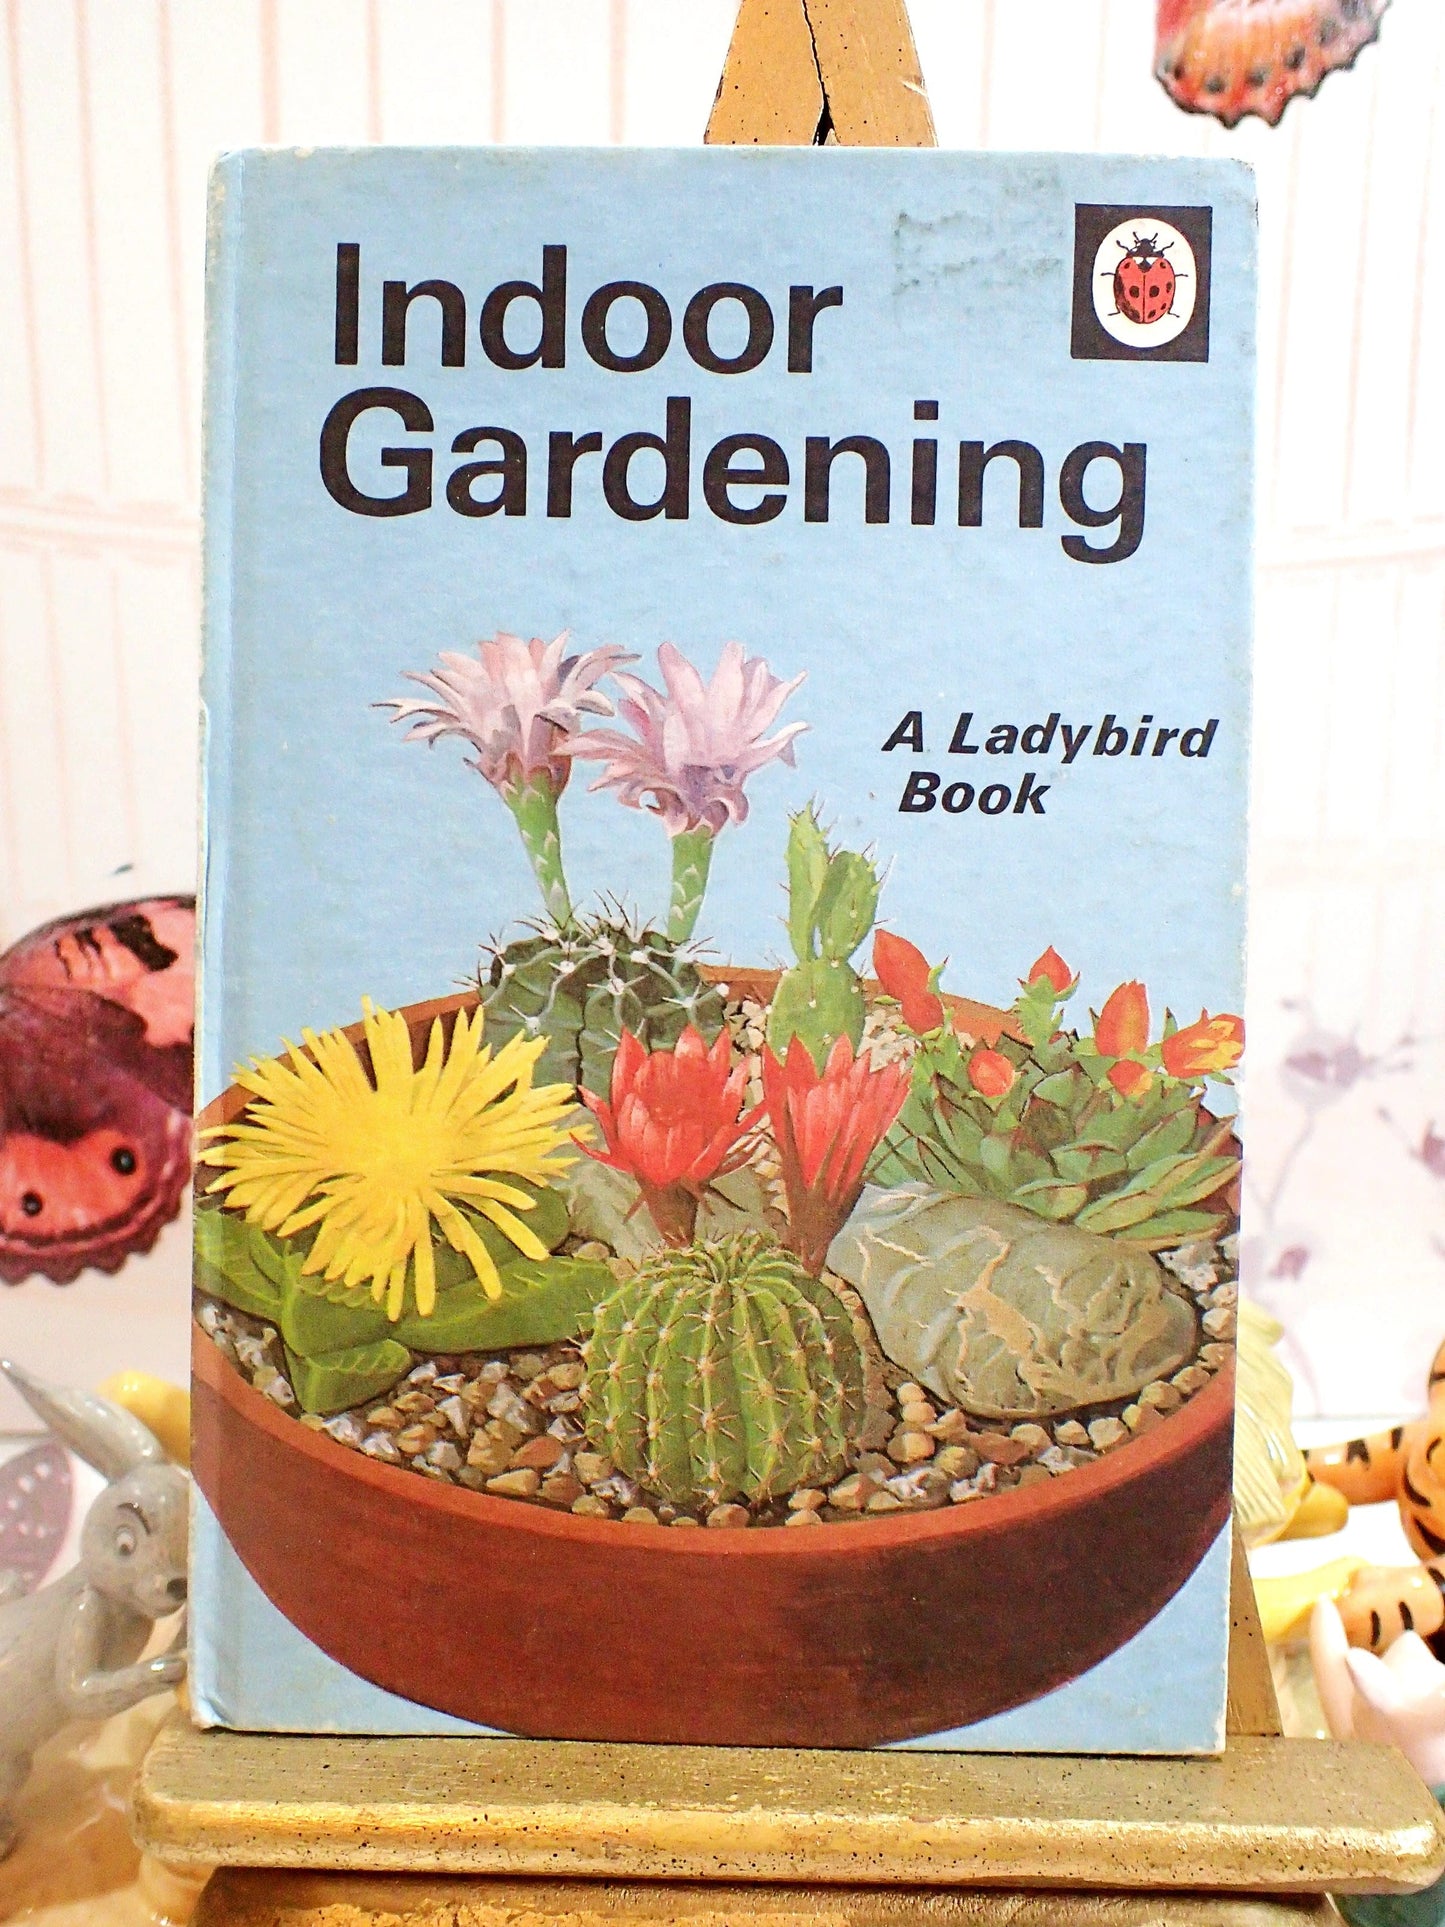 A ladybird book Indoor Gardening with cacti on the front. 